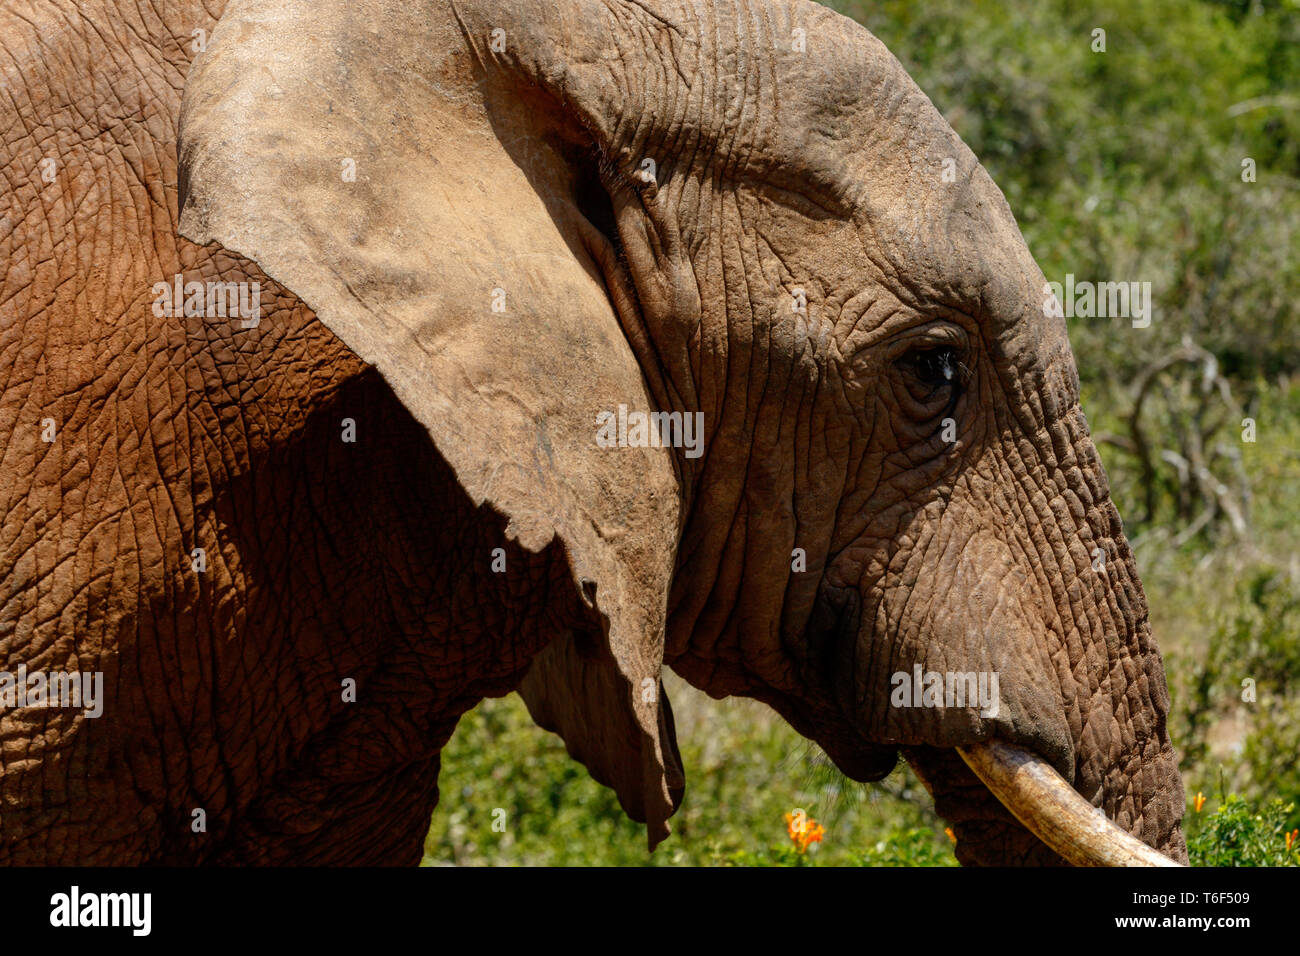 Close up of an Elephant passing by Stock Photo